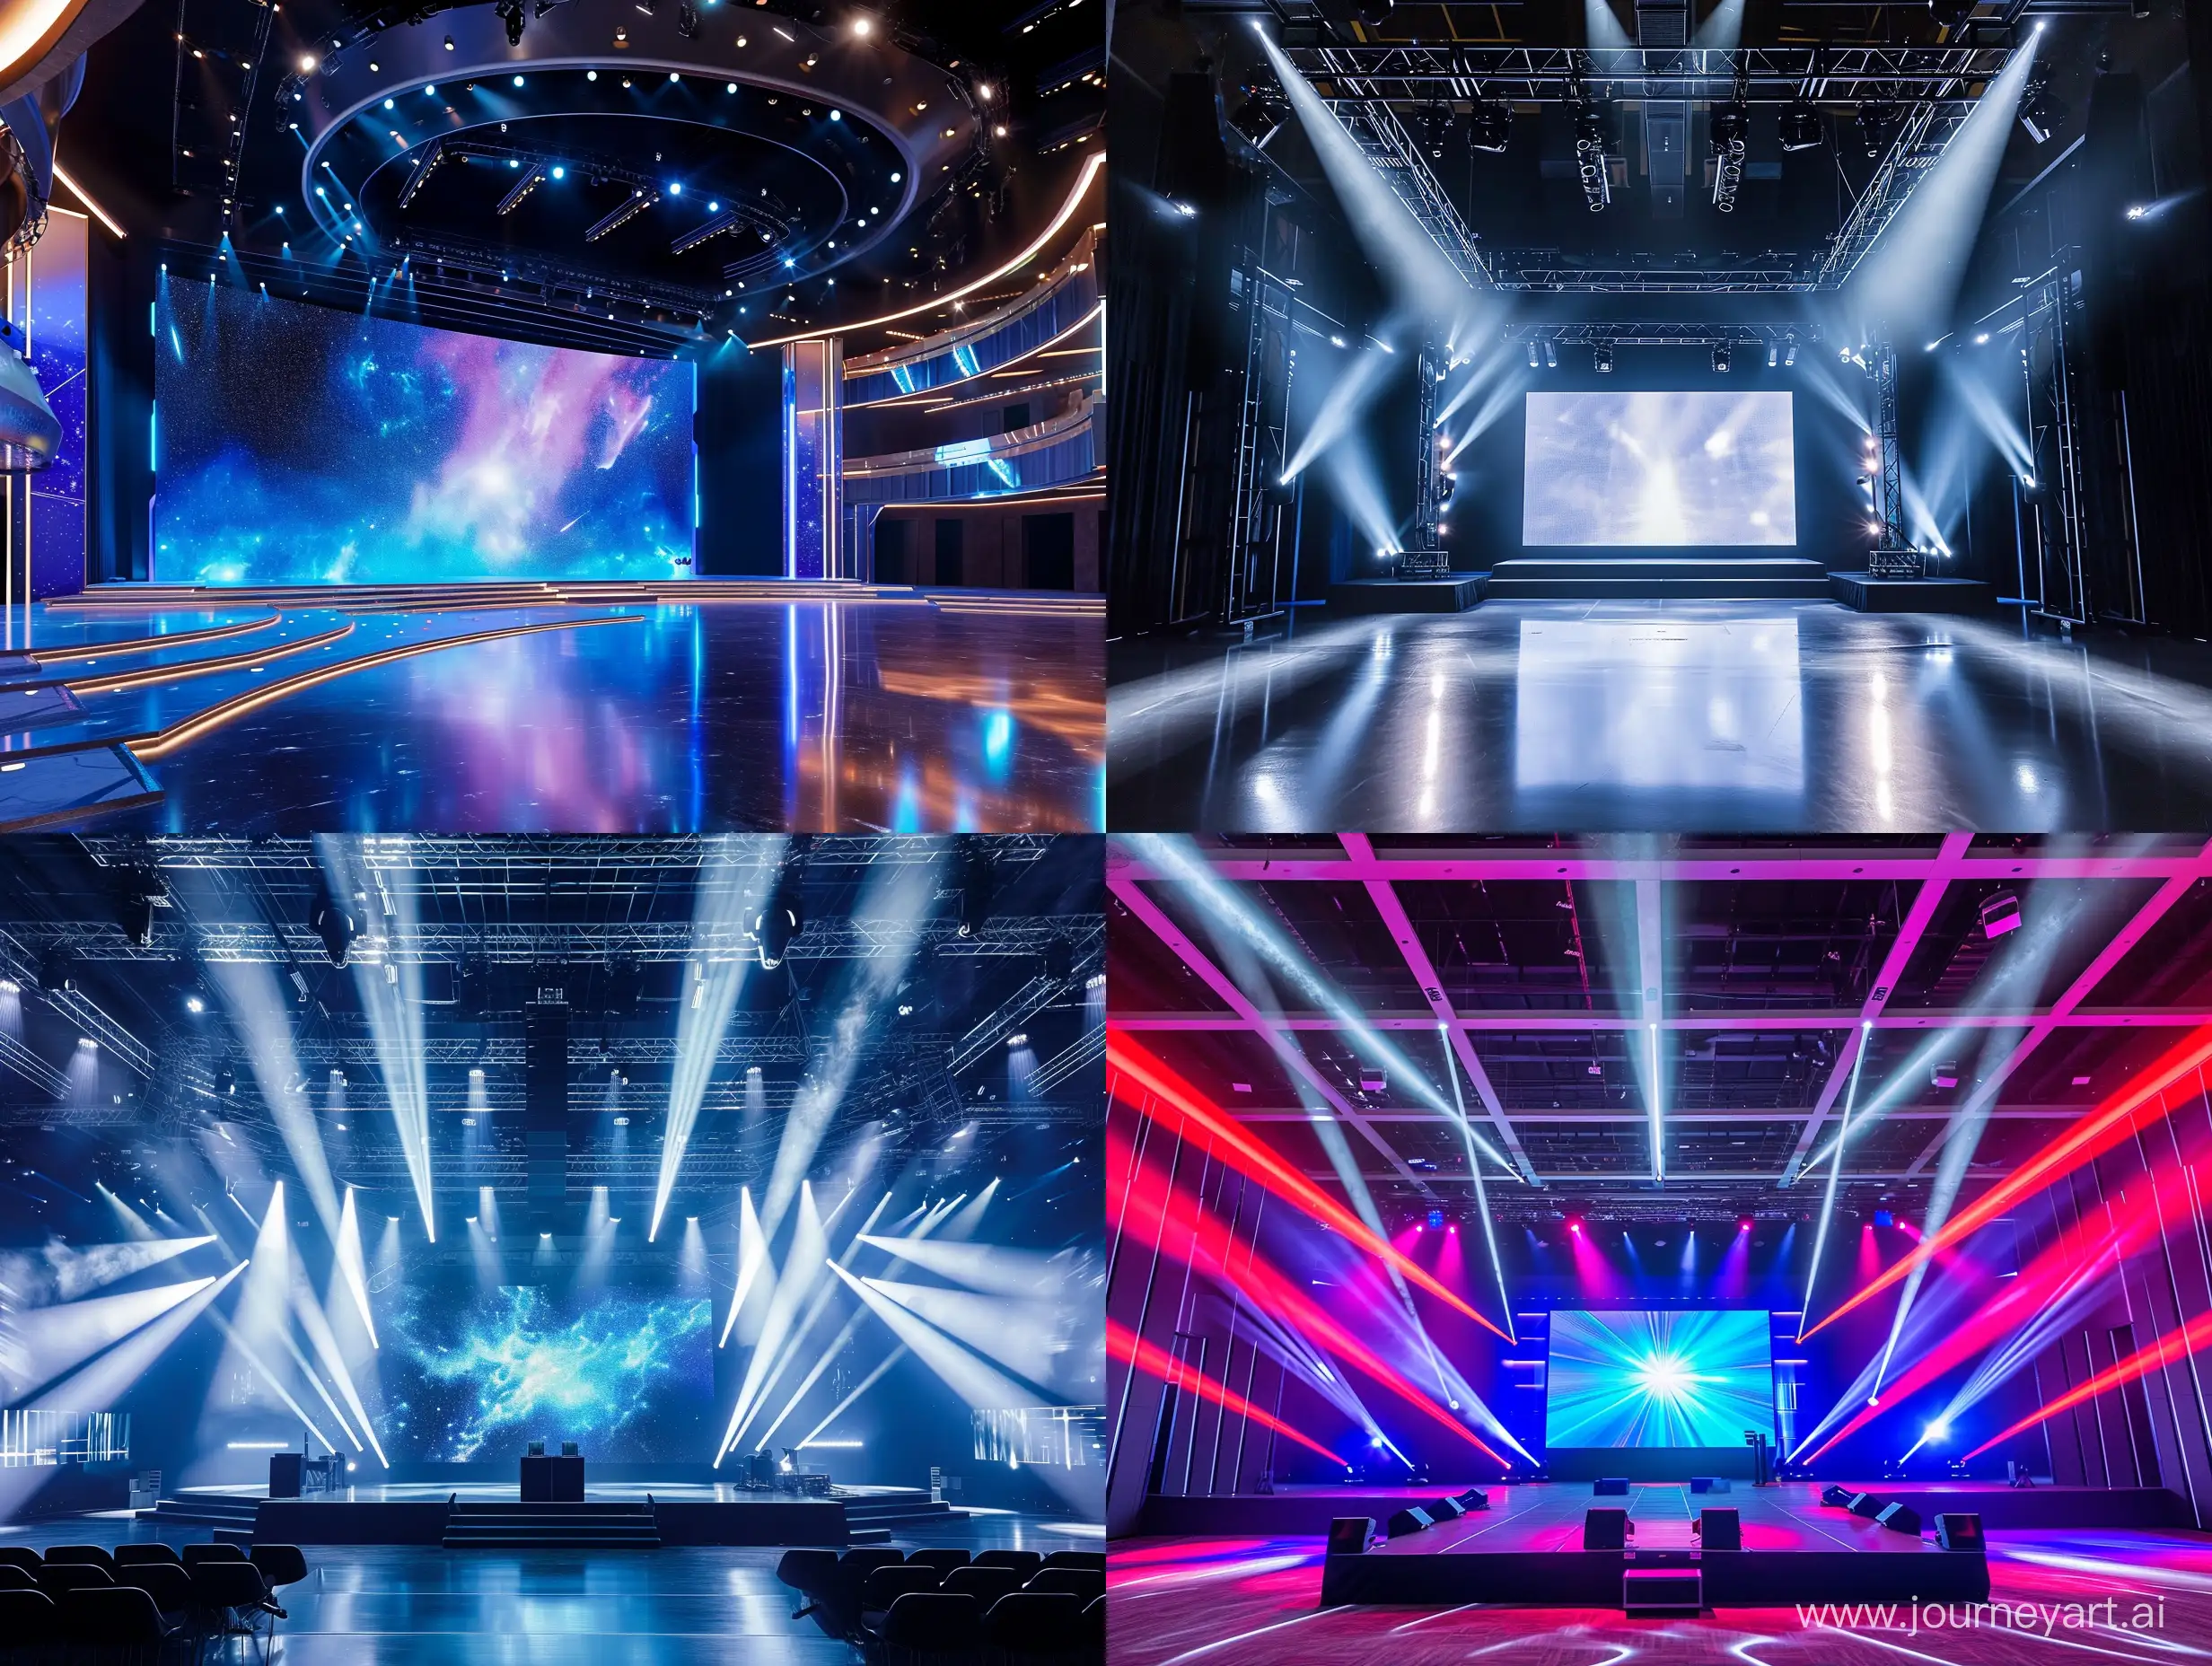 Technologically advanced product launch event hall, stage effects, a massive screen in the center, highest quality, realism, a masterpiece of photography.